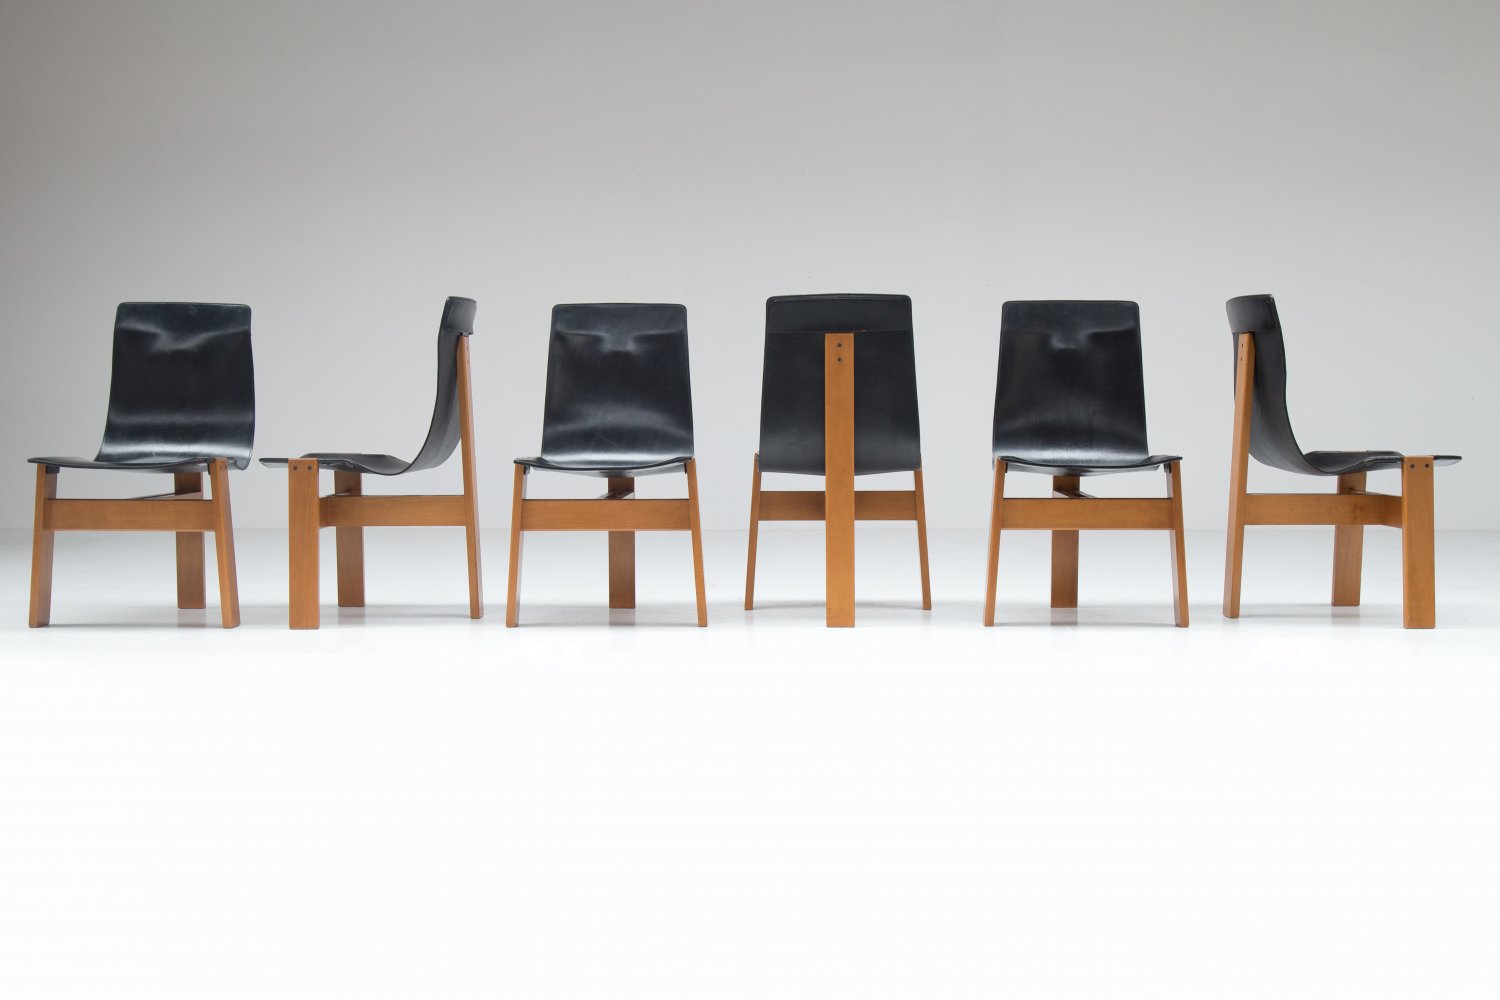 Set of 6 chairs by Angelo Mangiarotti for Skipper.